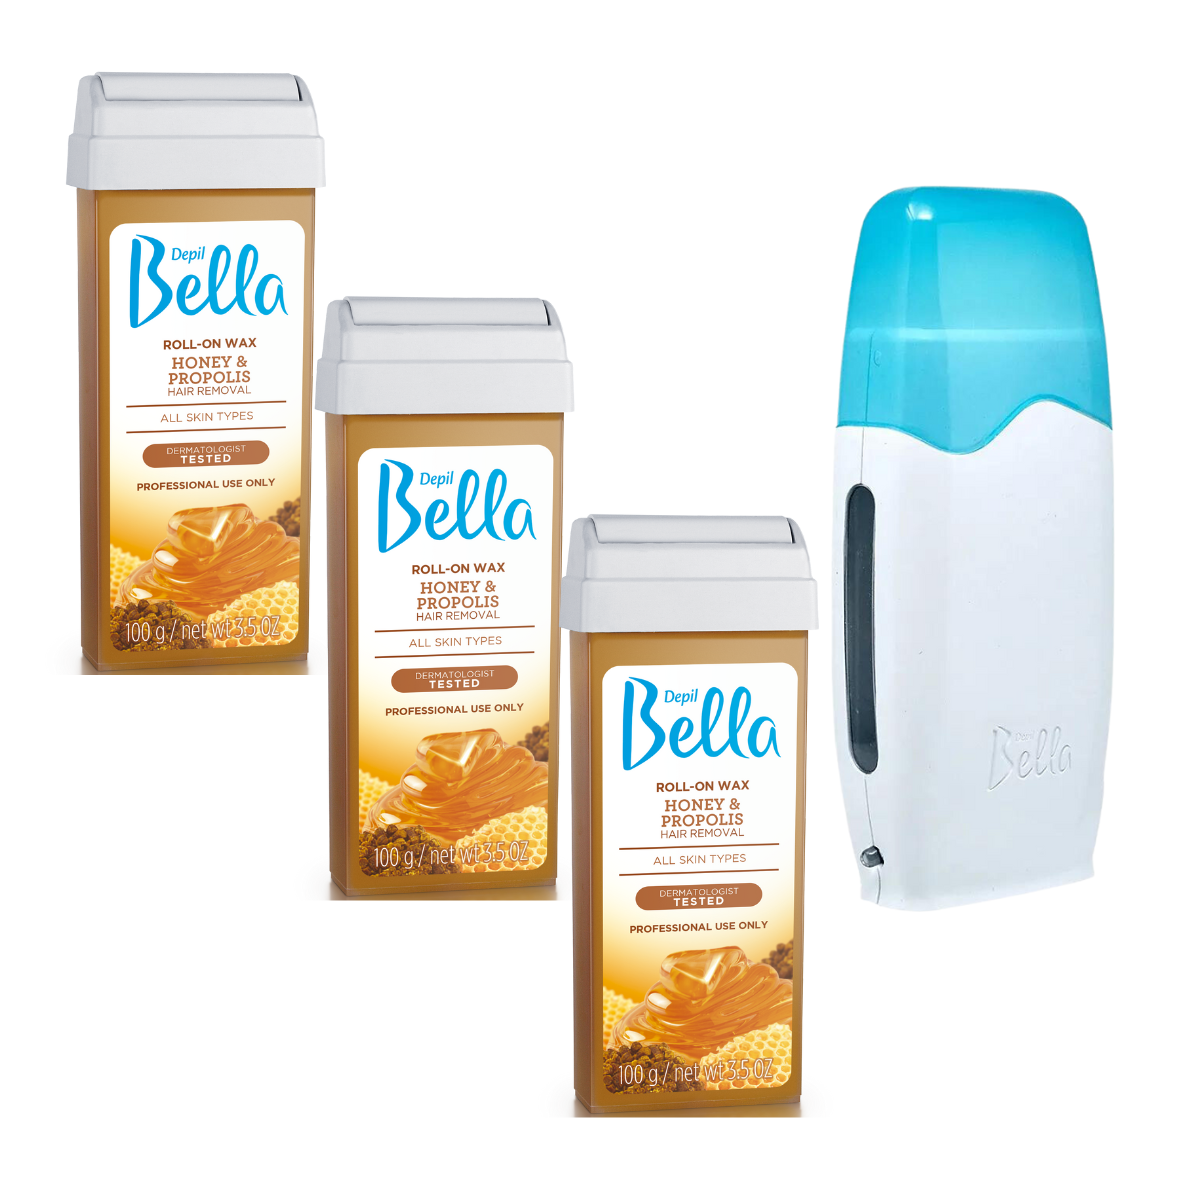 Depil Bella Hair Removal Bundle - Roll On Honey, Pre-Wax Astringent, Wax-Off Oil, Warmer, Non-Woven Cloths & Case - Buy professional cosmetics dedicated to hair removal